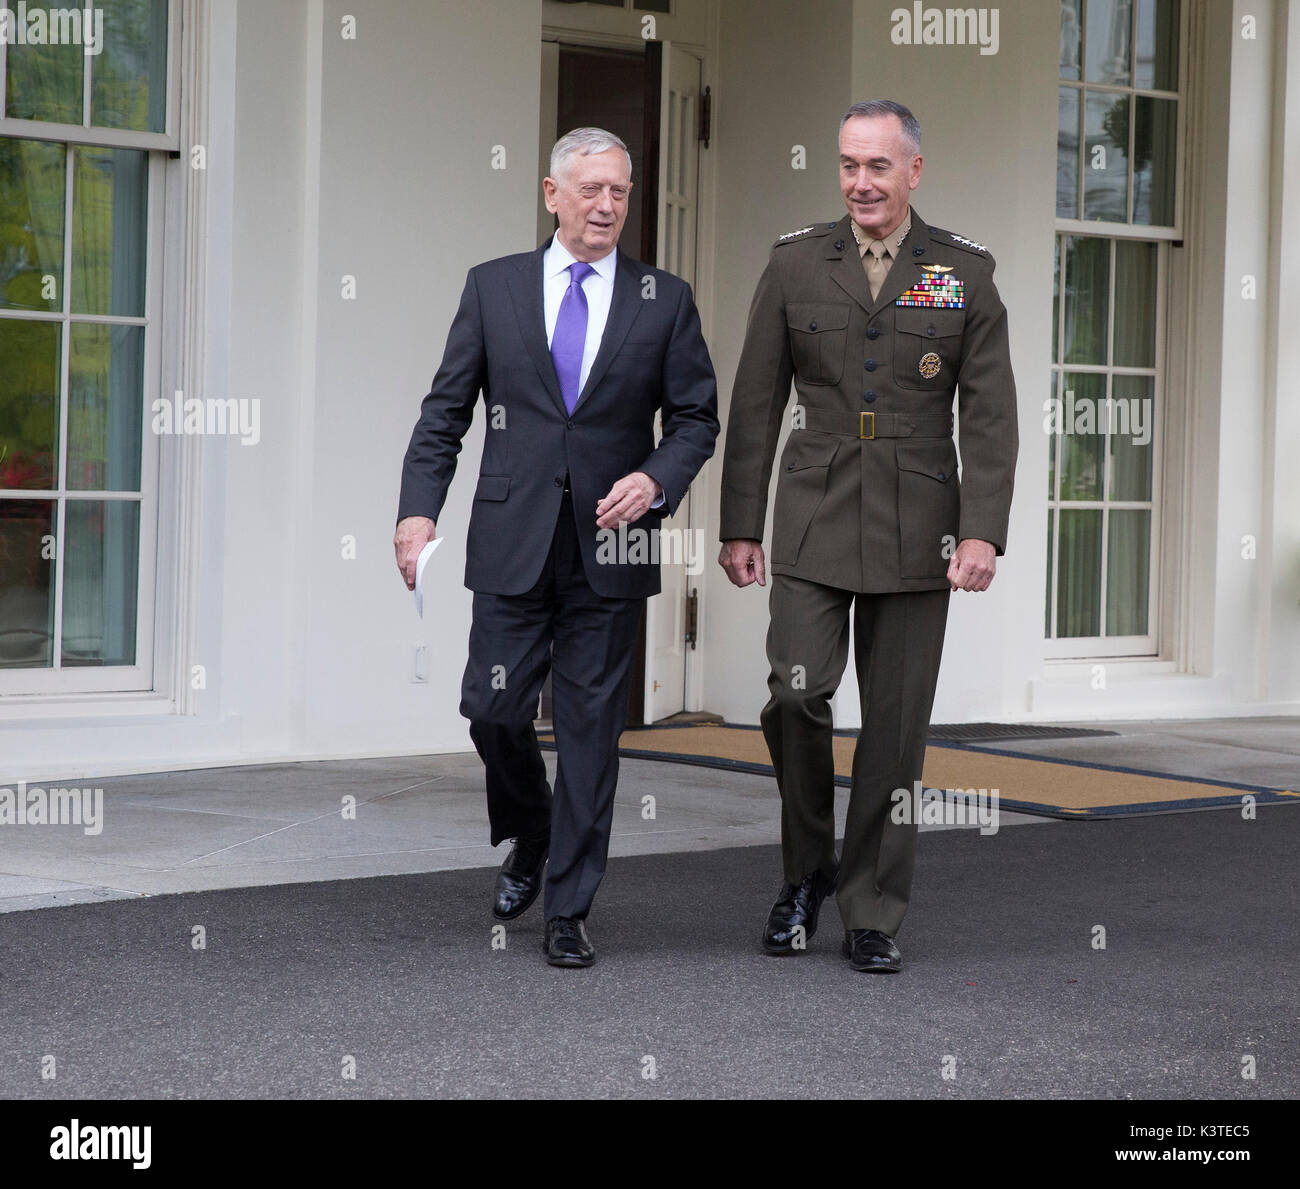 United States Secretary of Defense James Mattis (left) and the Chairman of the Joint Chiefs of Staff US Marine Corps General Joseph Dunford (right) walk to the microphones at The White House to make a statement on a possible military response to the recent North Korea missile launch, September 3, 2017. Credit: Chris Kleponis/Pool via CNP /MediaPunch Stock Photo